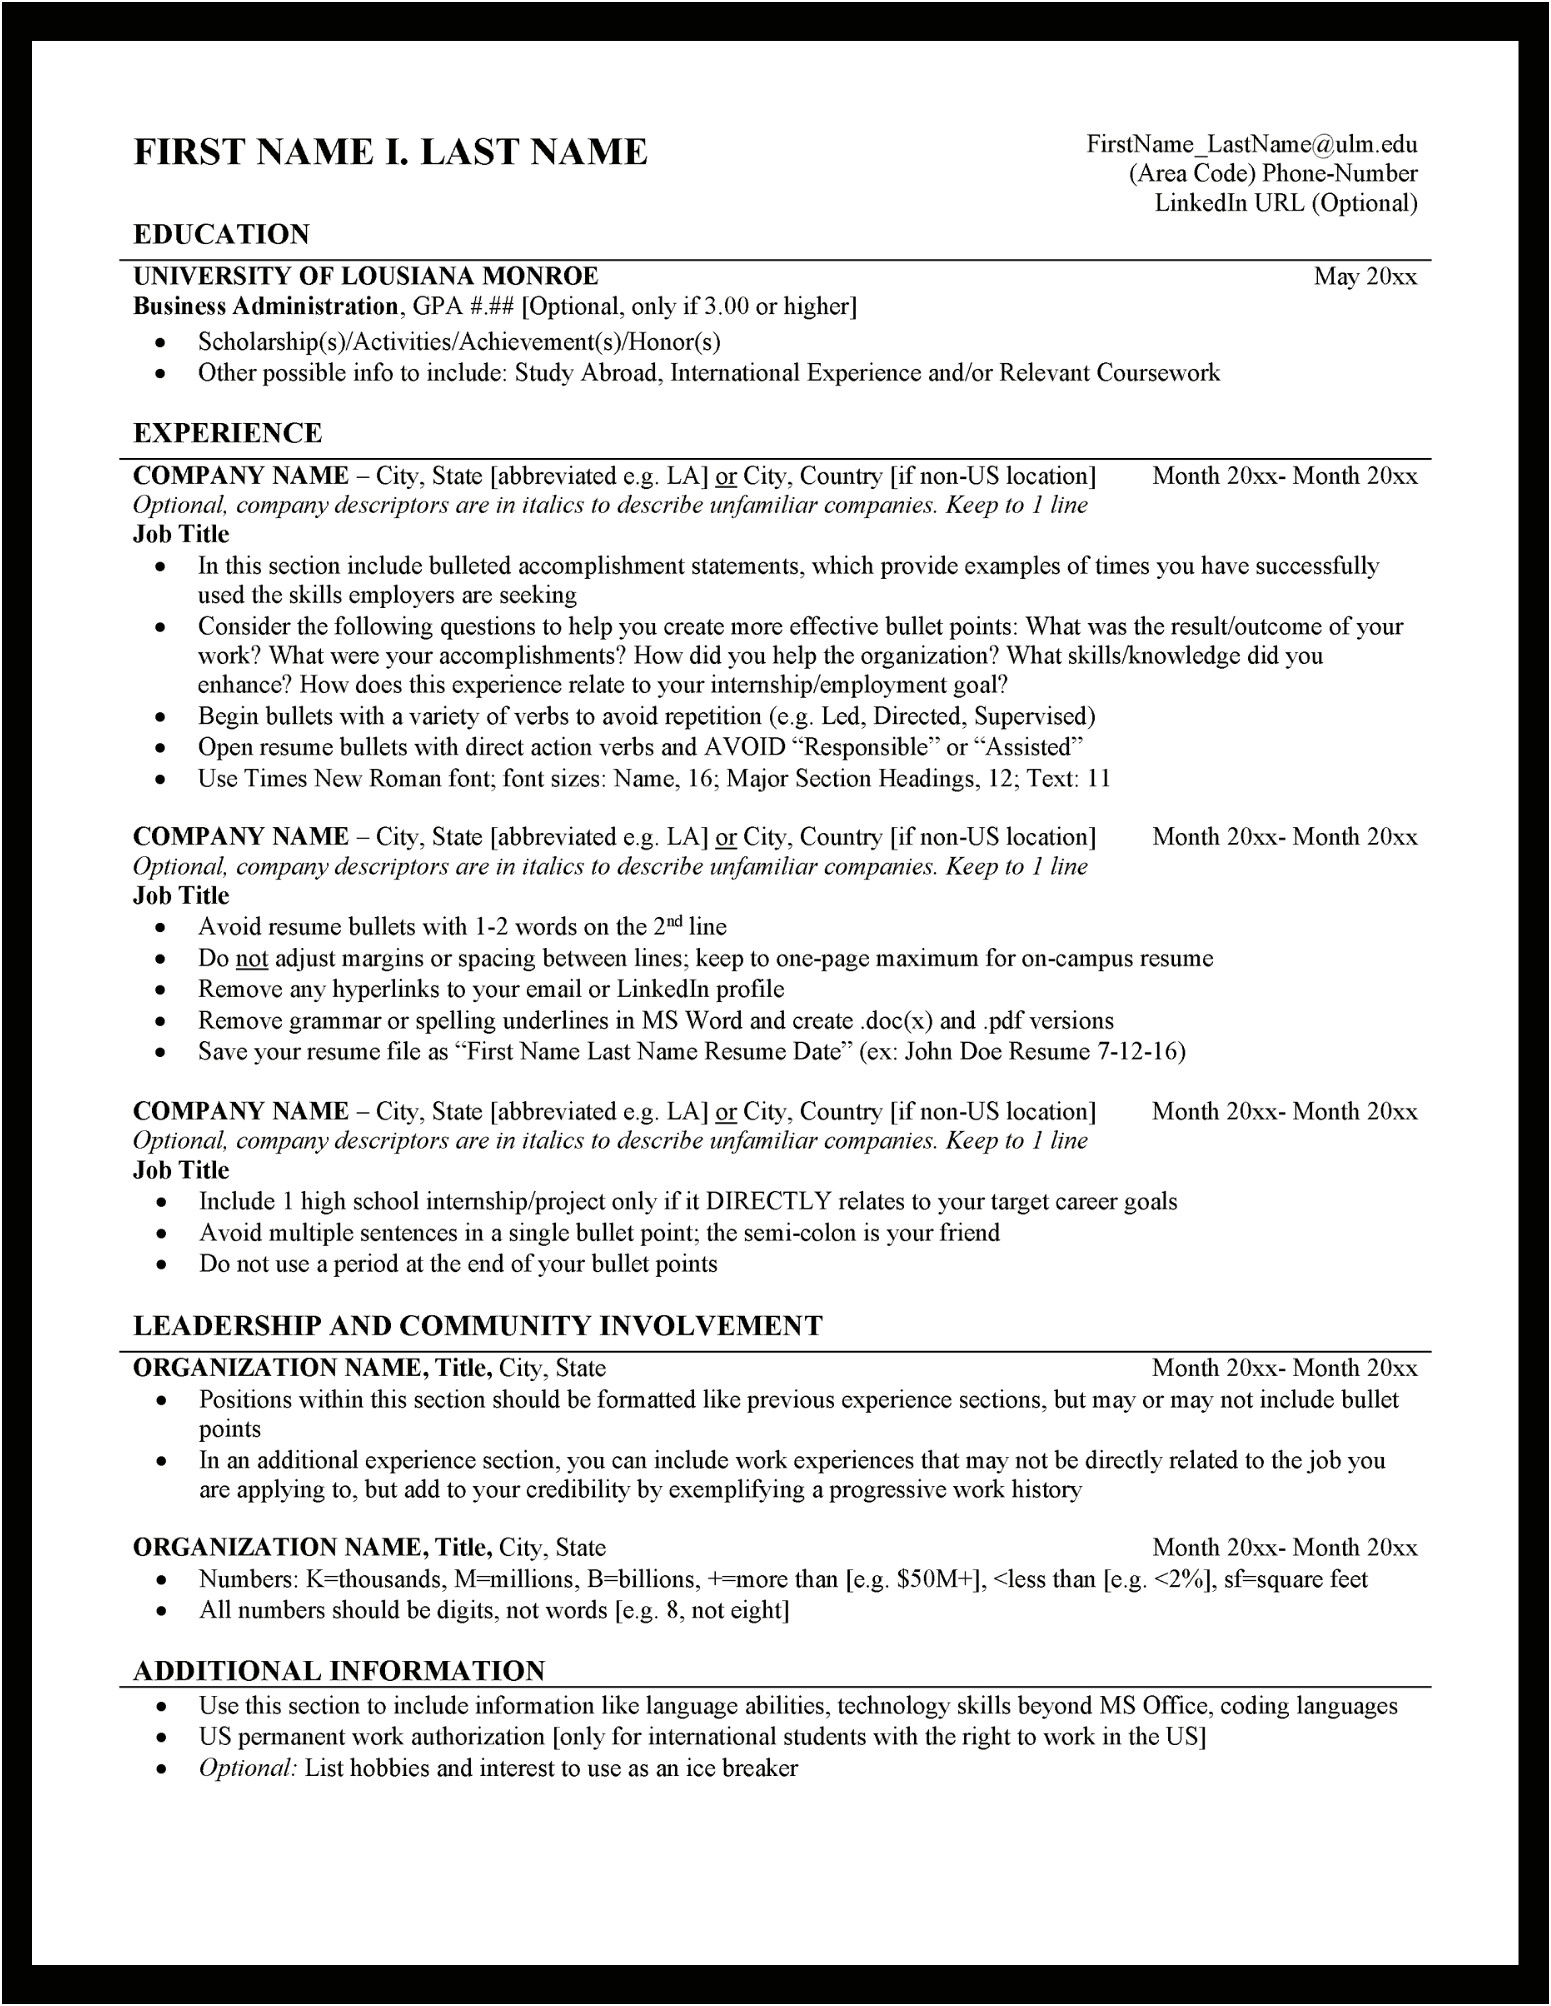 Skills And Interests Section Of Resume